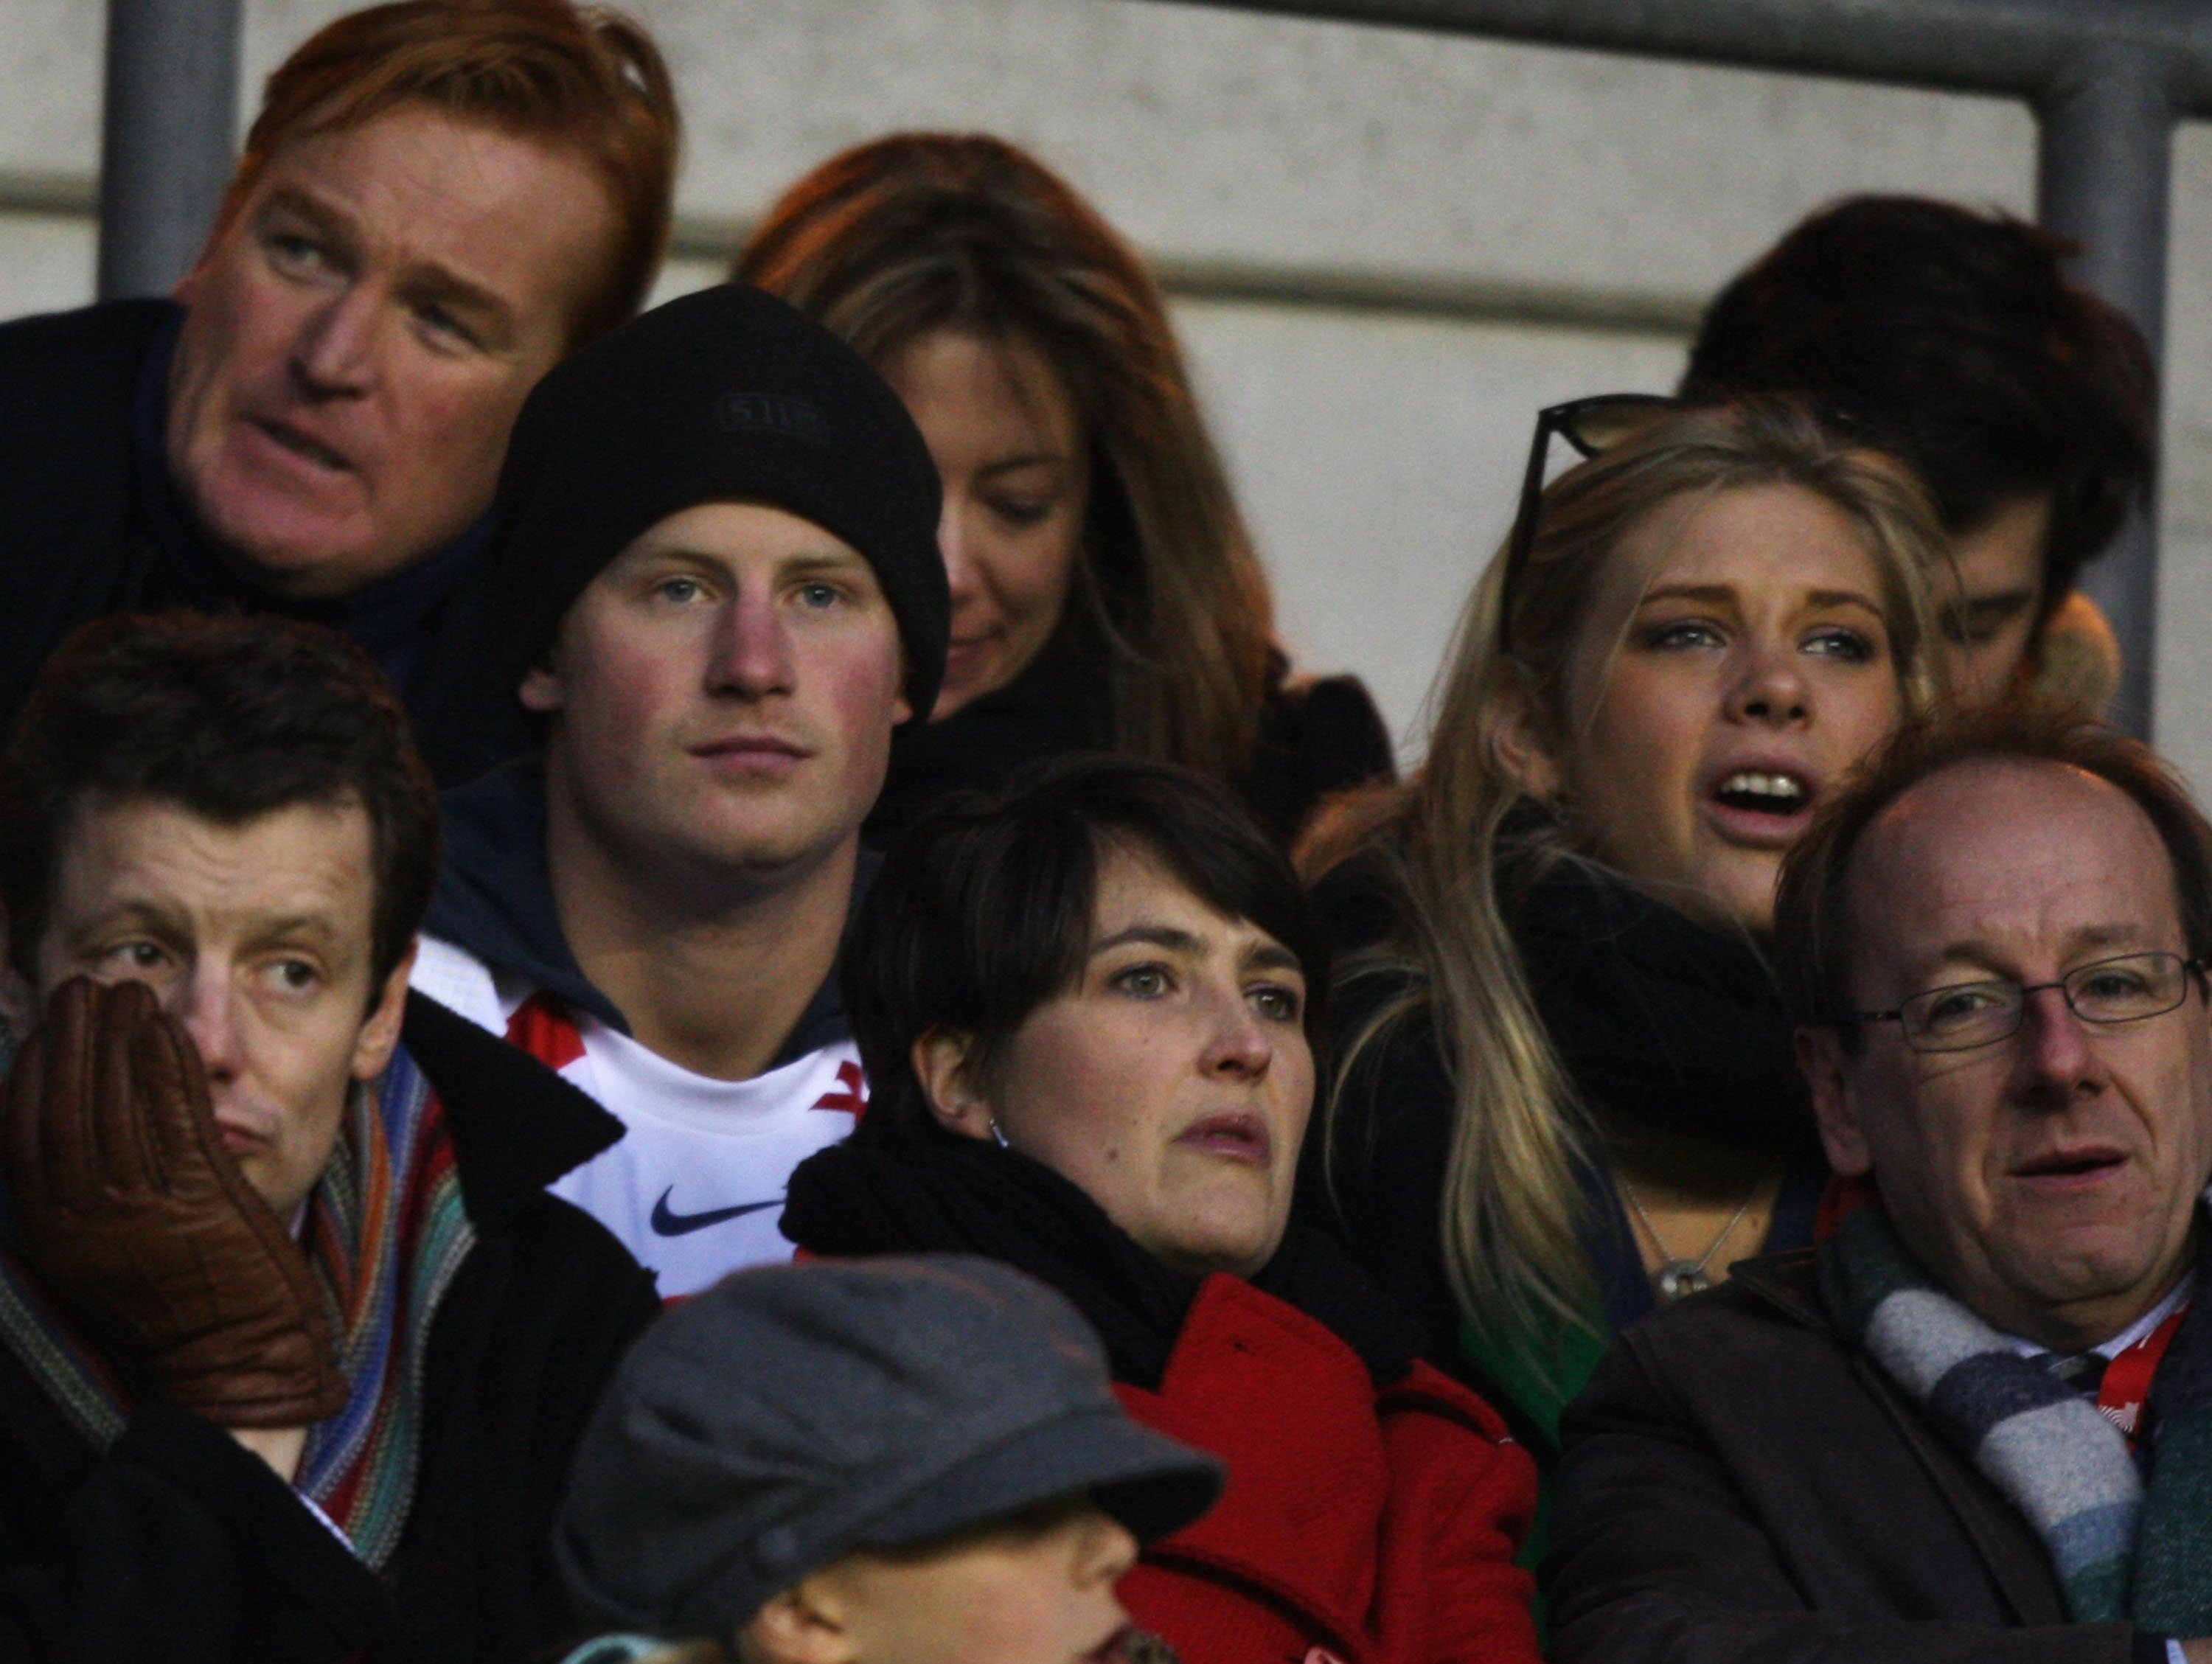 Prince Harry and Chelsy Davy attend the Investec Challenge match between England and South Africa at Twickenham on November 22, 2008 in London, England.  | Source: Getty Images